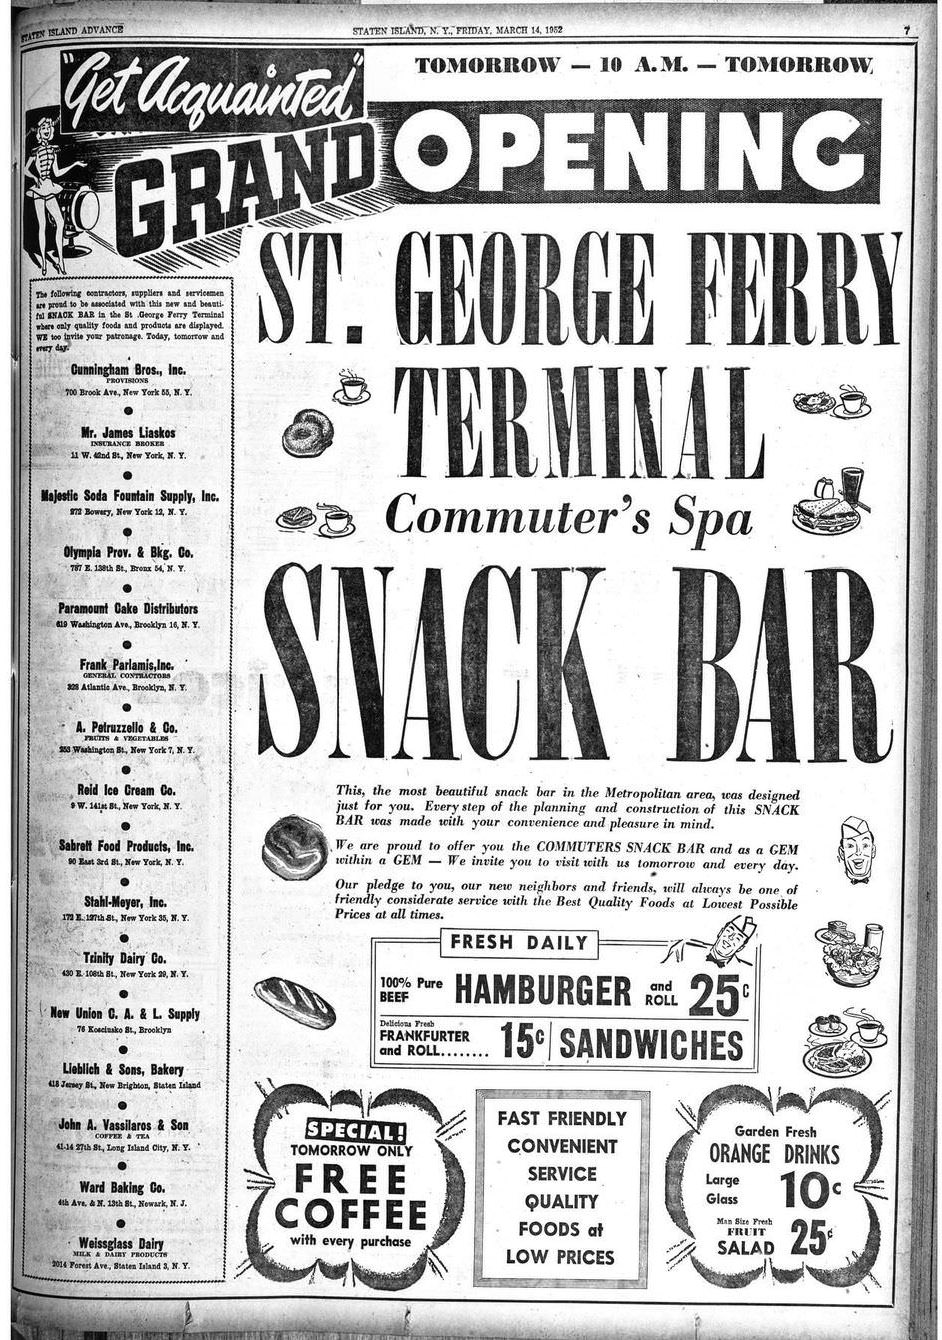 Staten Island Ferry Commuter'S Spa Snack Bar Grand Opening, 25¢ Burgers, 15¢ Hot Dogs, Free Coffee, 1952.